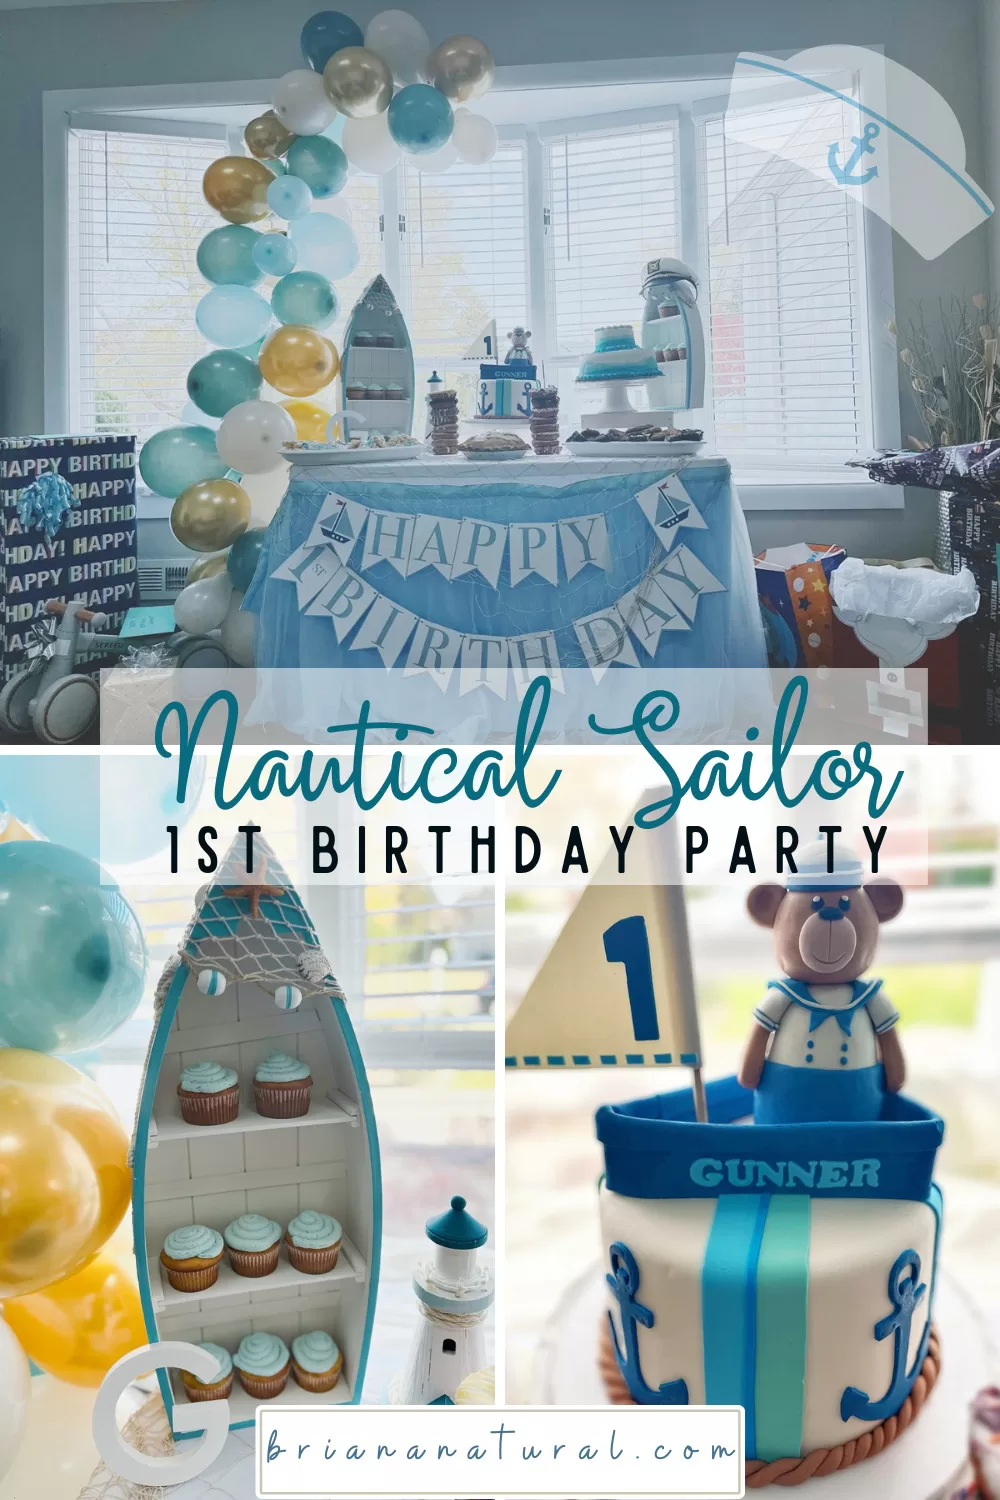 Cover photo for nautical sailor birthday party blog post